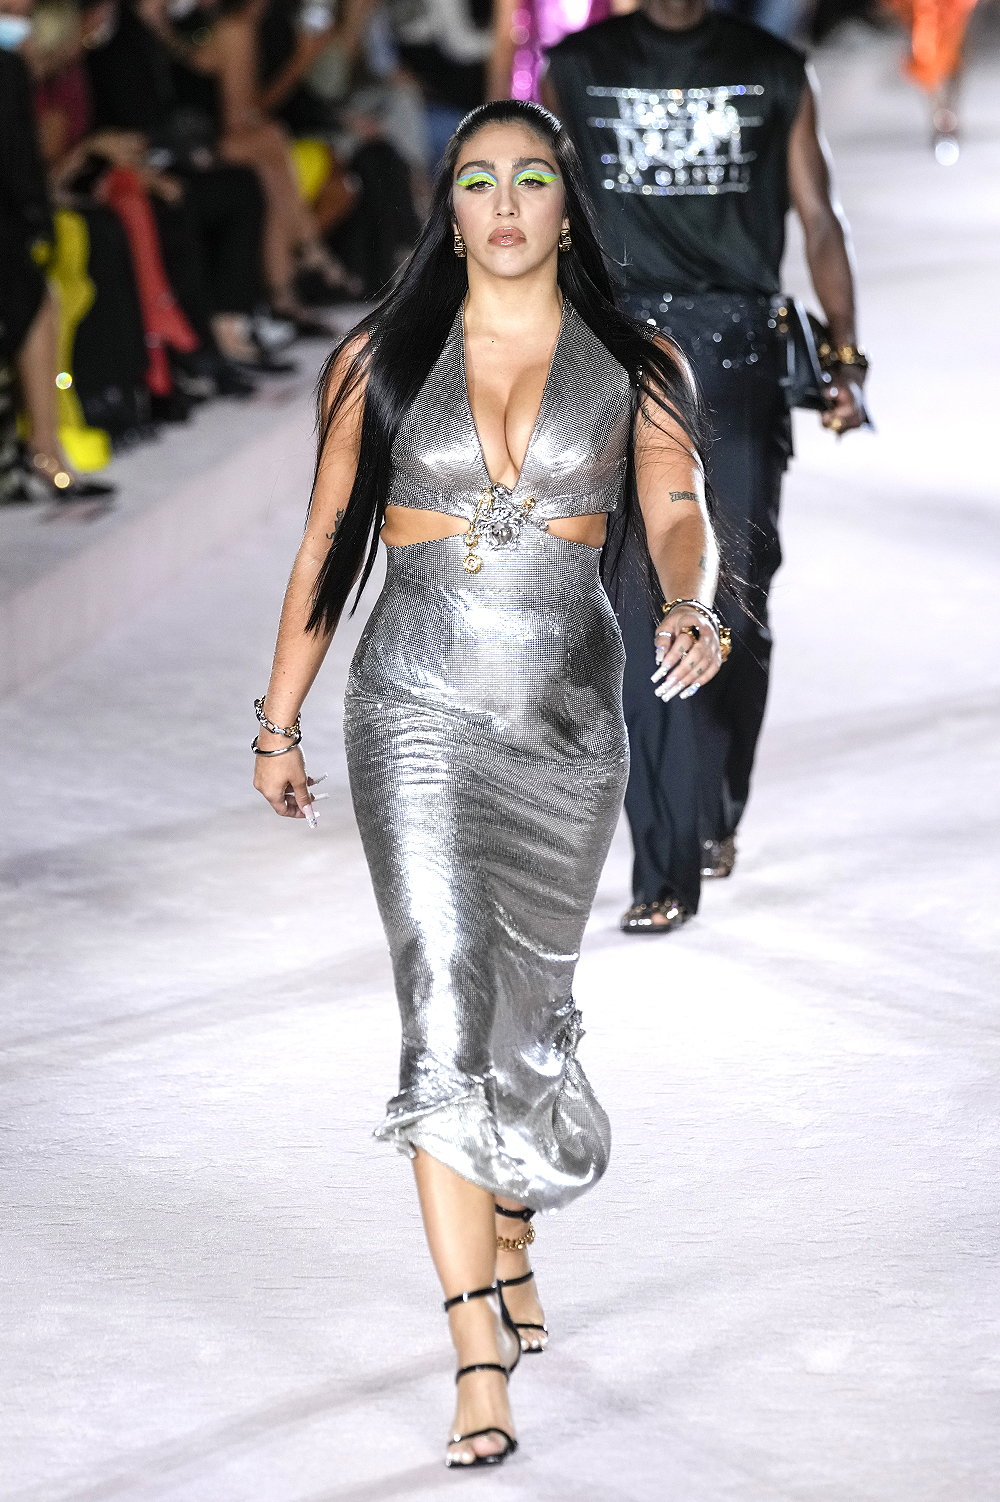 Lourdes Leon wears a plunging silver dress as she walks the runway for Versace at Milan Fashion Week